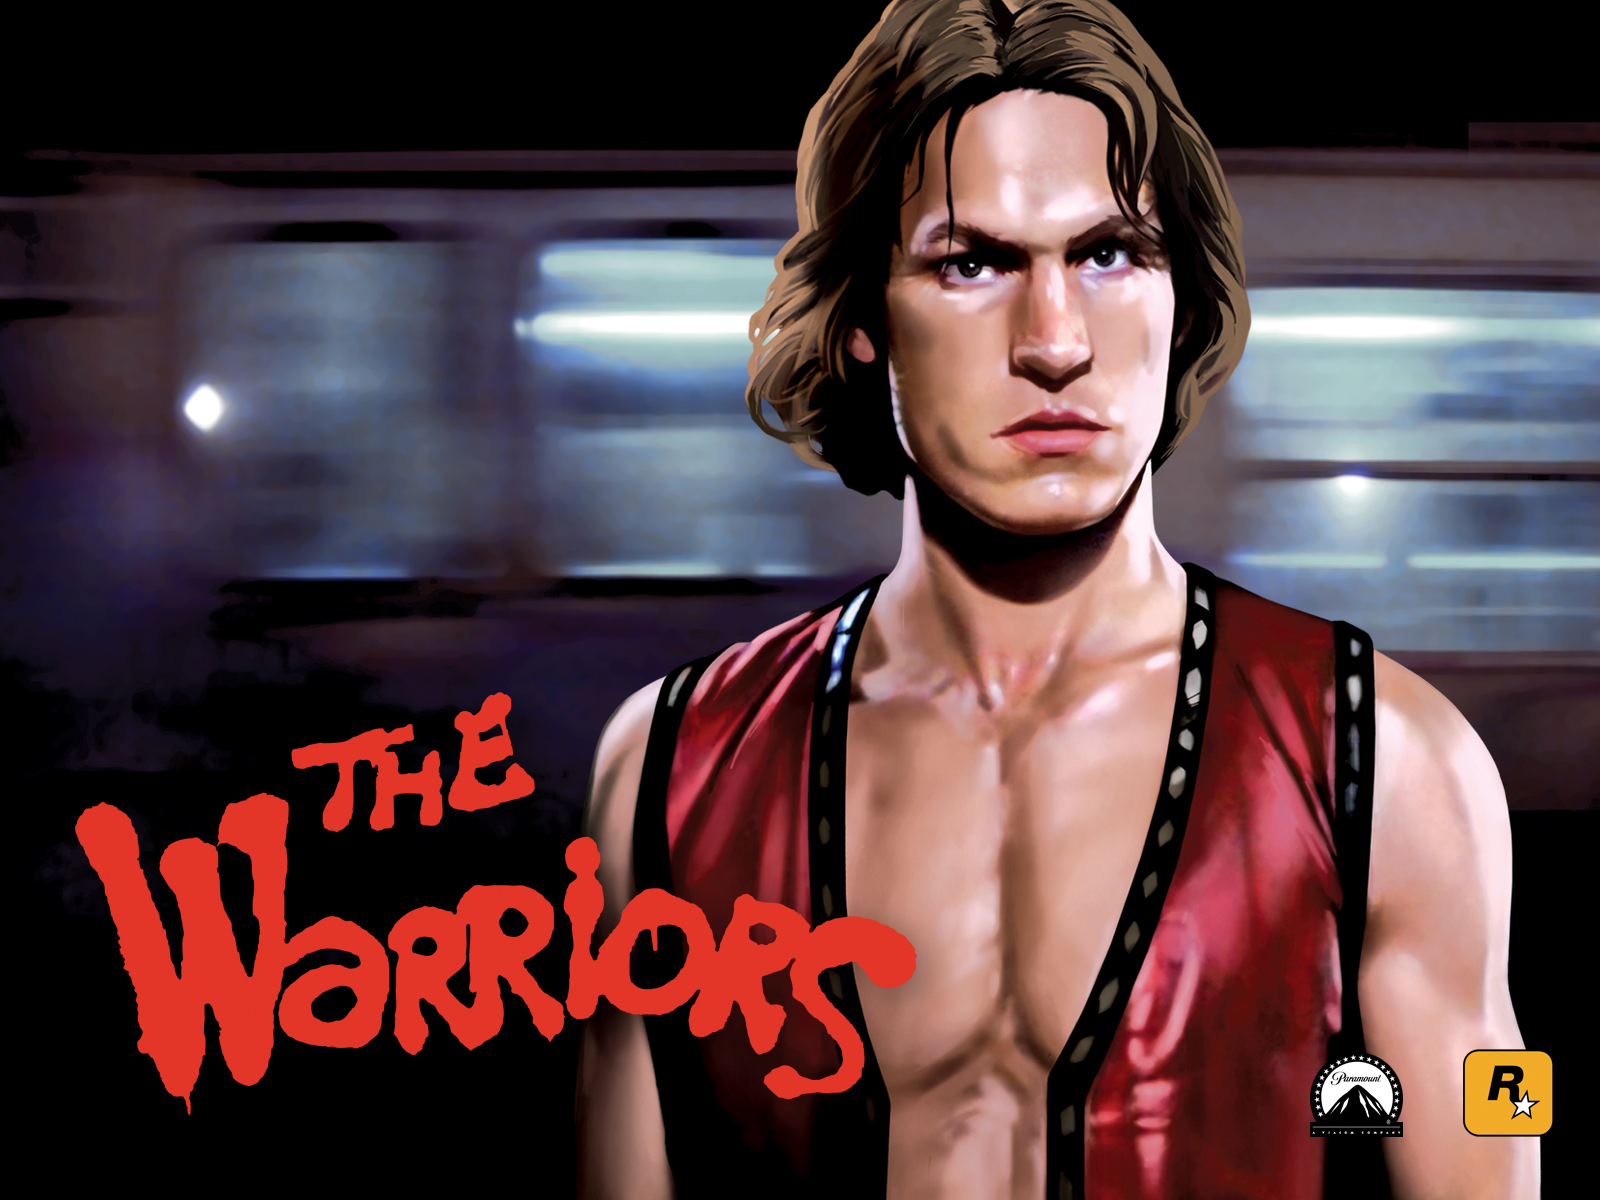 the warriors ps2